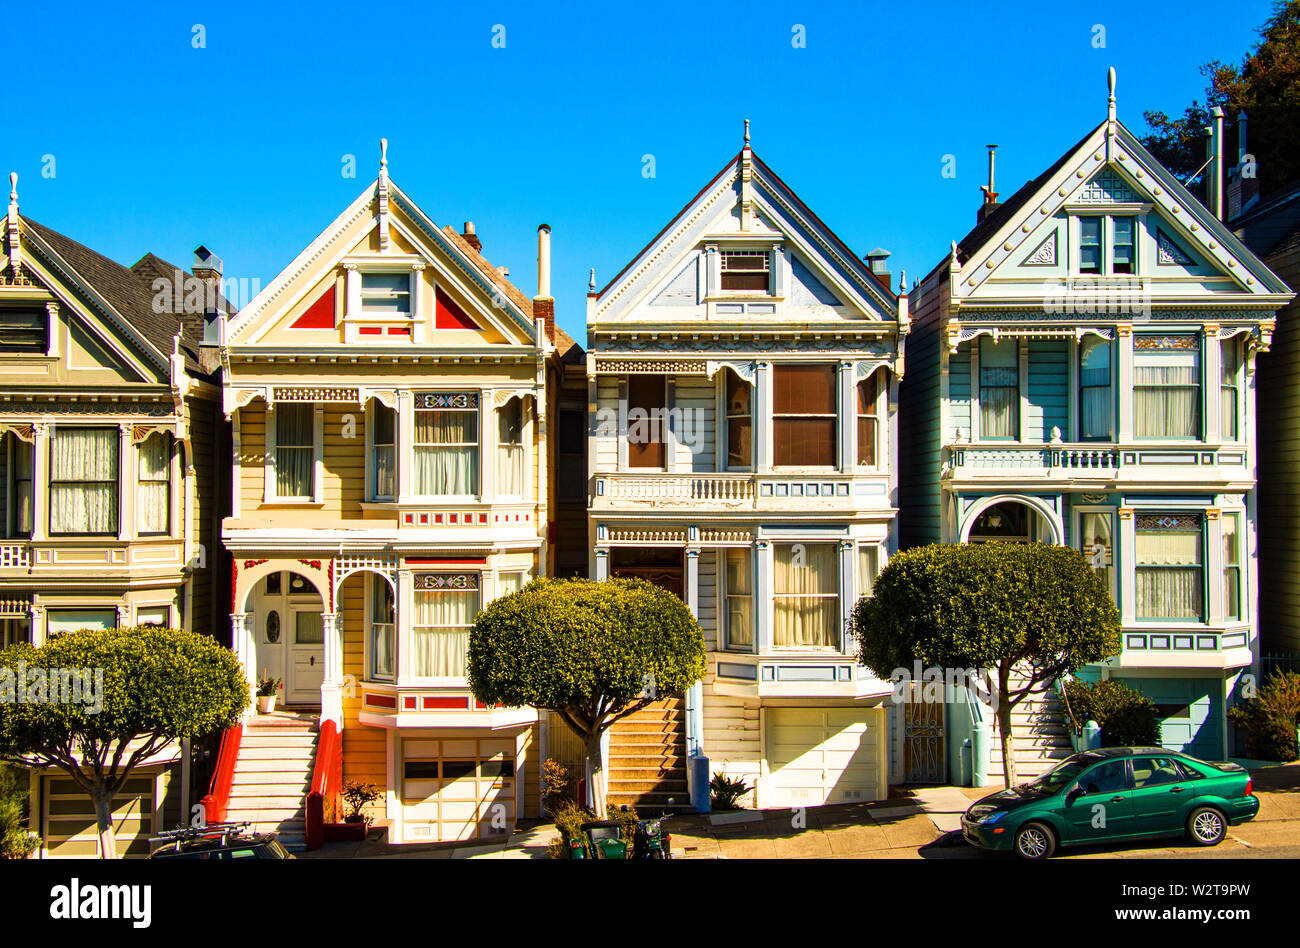 San Francisco residential street with The Painted Ladies, rows of victorian wooden houses at Alamo Square. San Francisco, California, USA Stock Photo